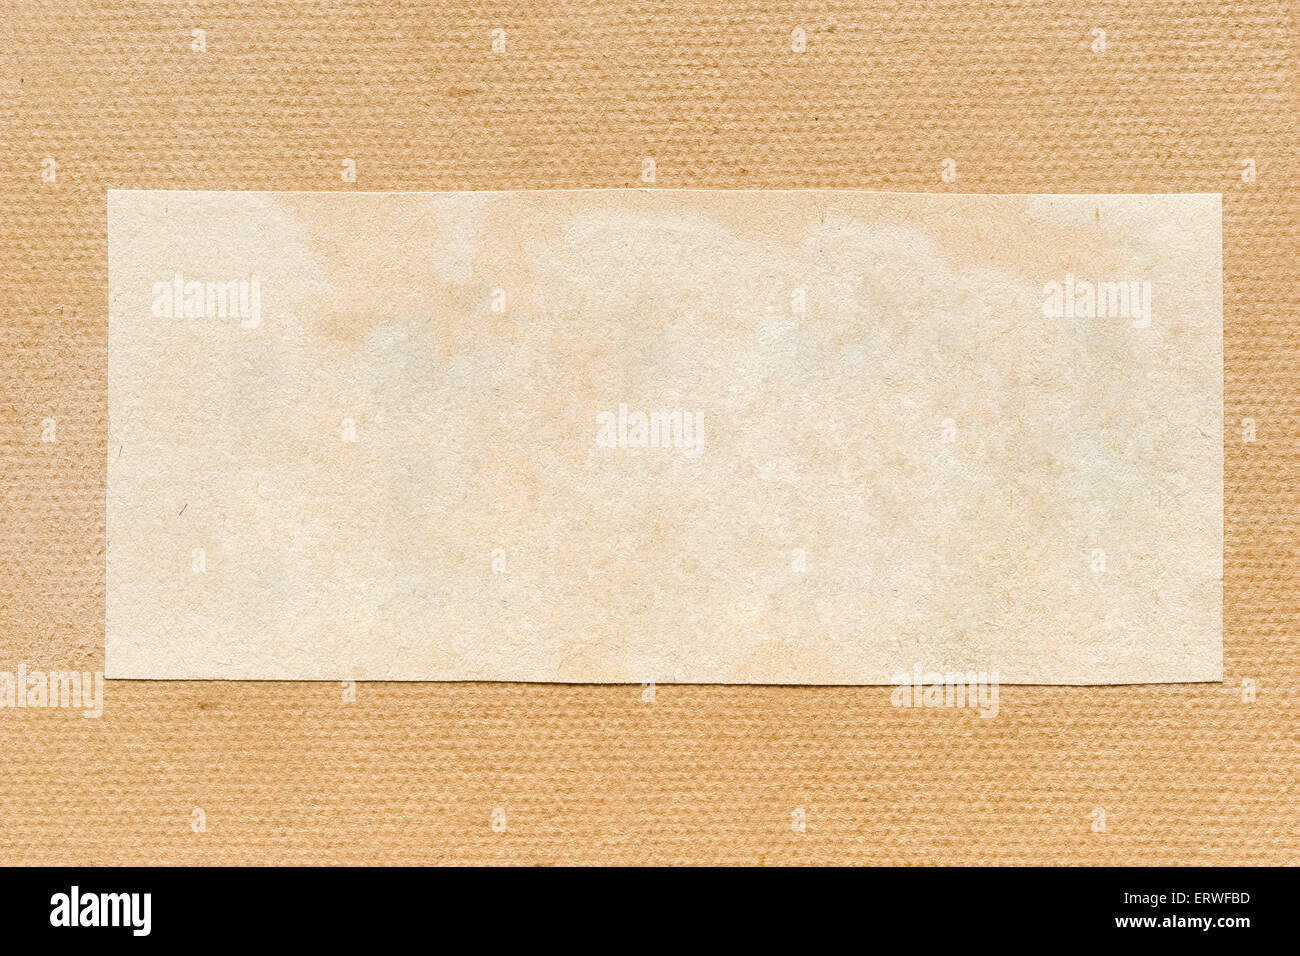 The texture of cardboard with a sign, closeup Stock Photo